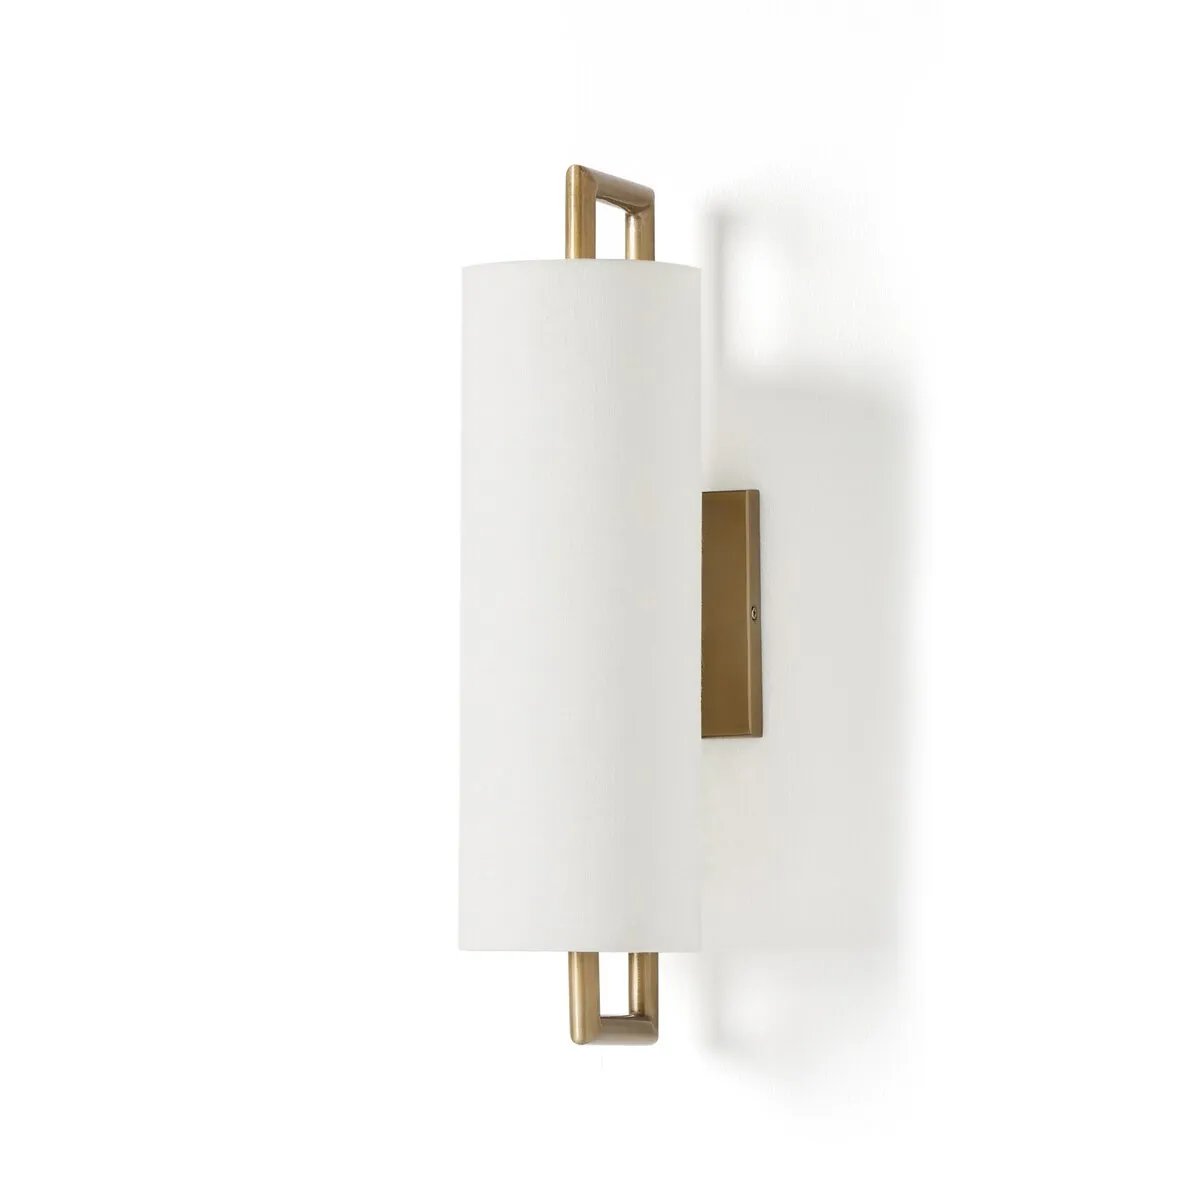 Featuring a single, elongated linen shade, this sconce gracefully diffuses light and is mounted on a streamlined aged brass frame for a sleek, contemporary look.Collection: Camde Amethyst Home provides interior design, new home construction design consulting, vintage area rugs, and lighting in the Washington metro area.